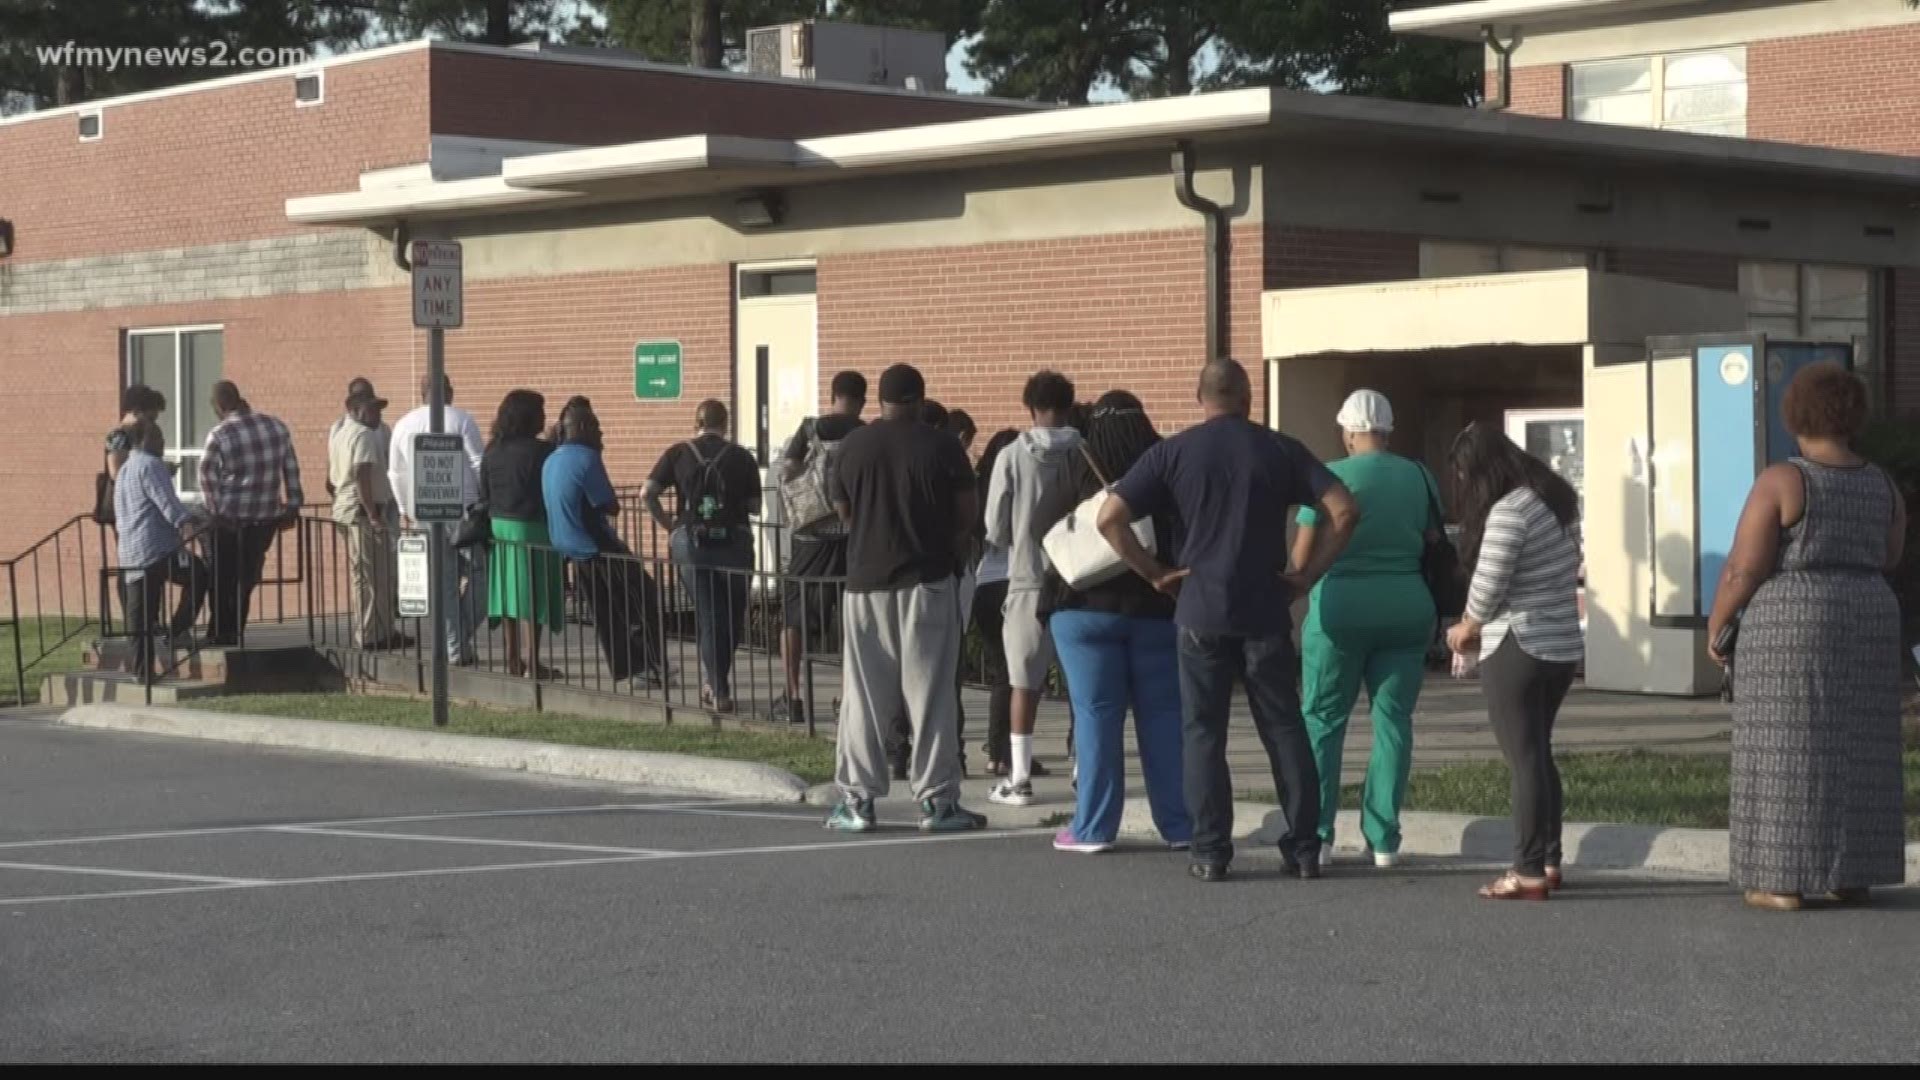 DMV Extends Office Hours To Tackle Long Lines